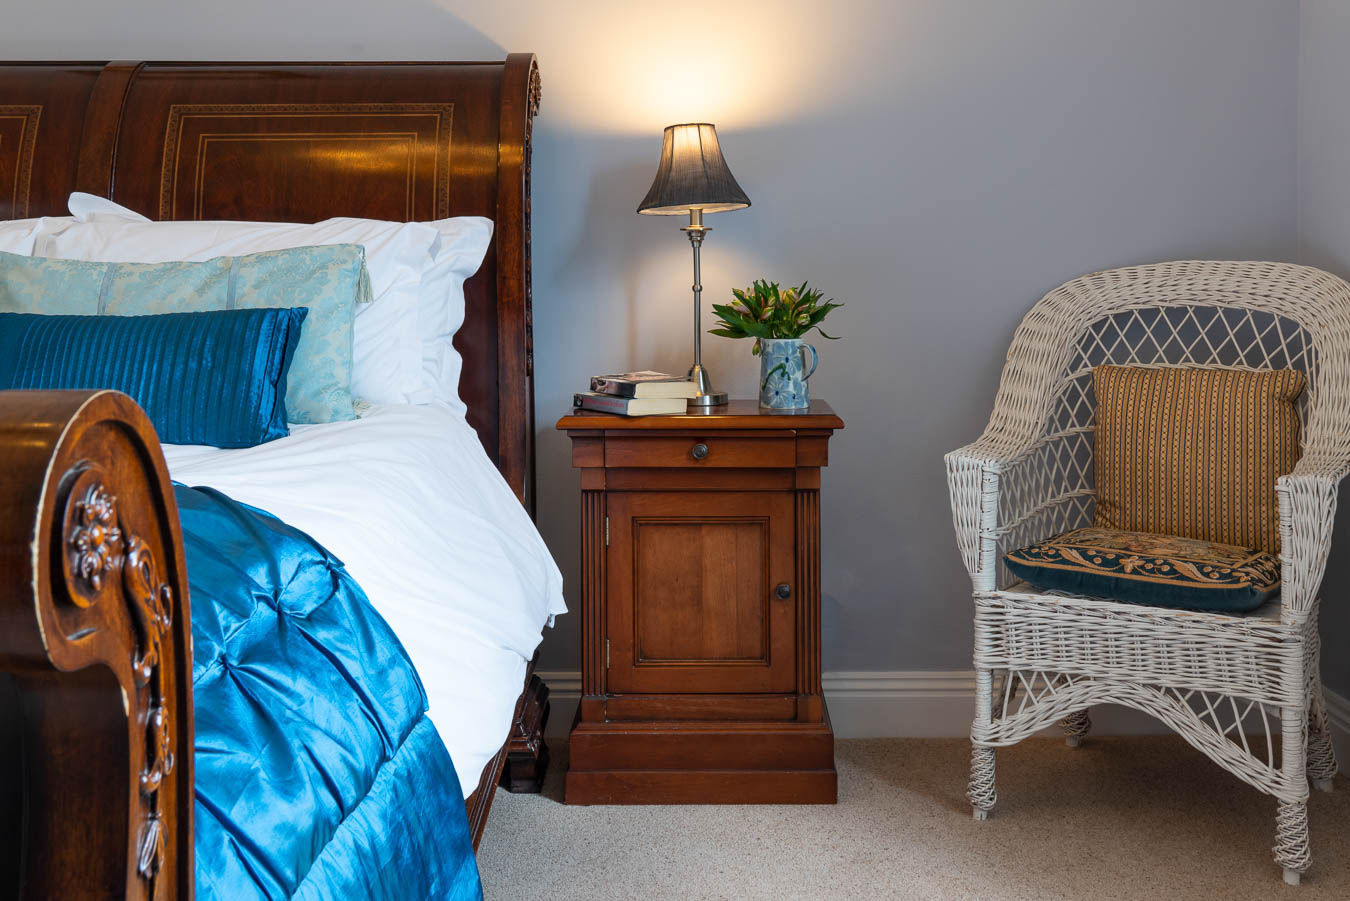 Mahogany bedside table and sleigh kingsize bed in the Blue room in Flear House.